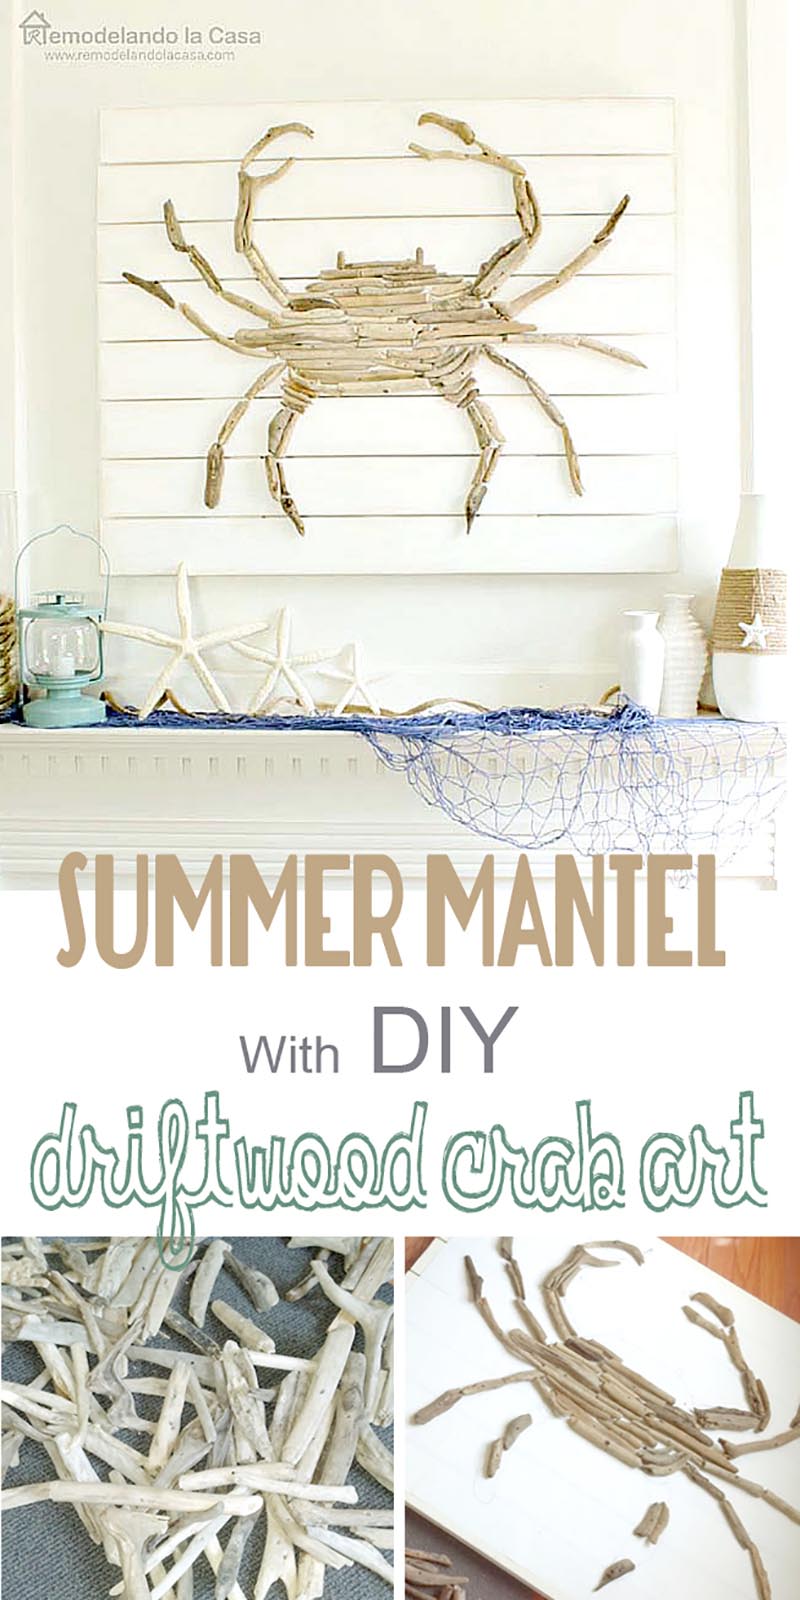 These Fabulous Coastal Farmhouse DIY Projects will have your home oozing with Beachy Coastal Farmhouse Charm! Quick and Easy DIYS that will have you swear the waves are crashing on the Beach!